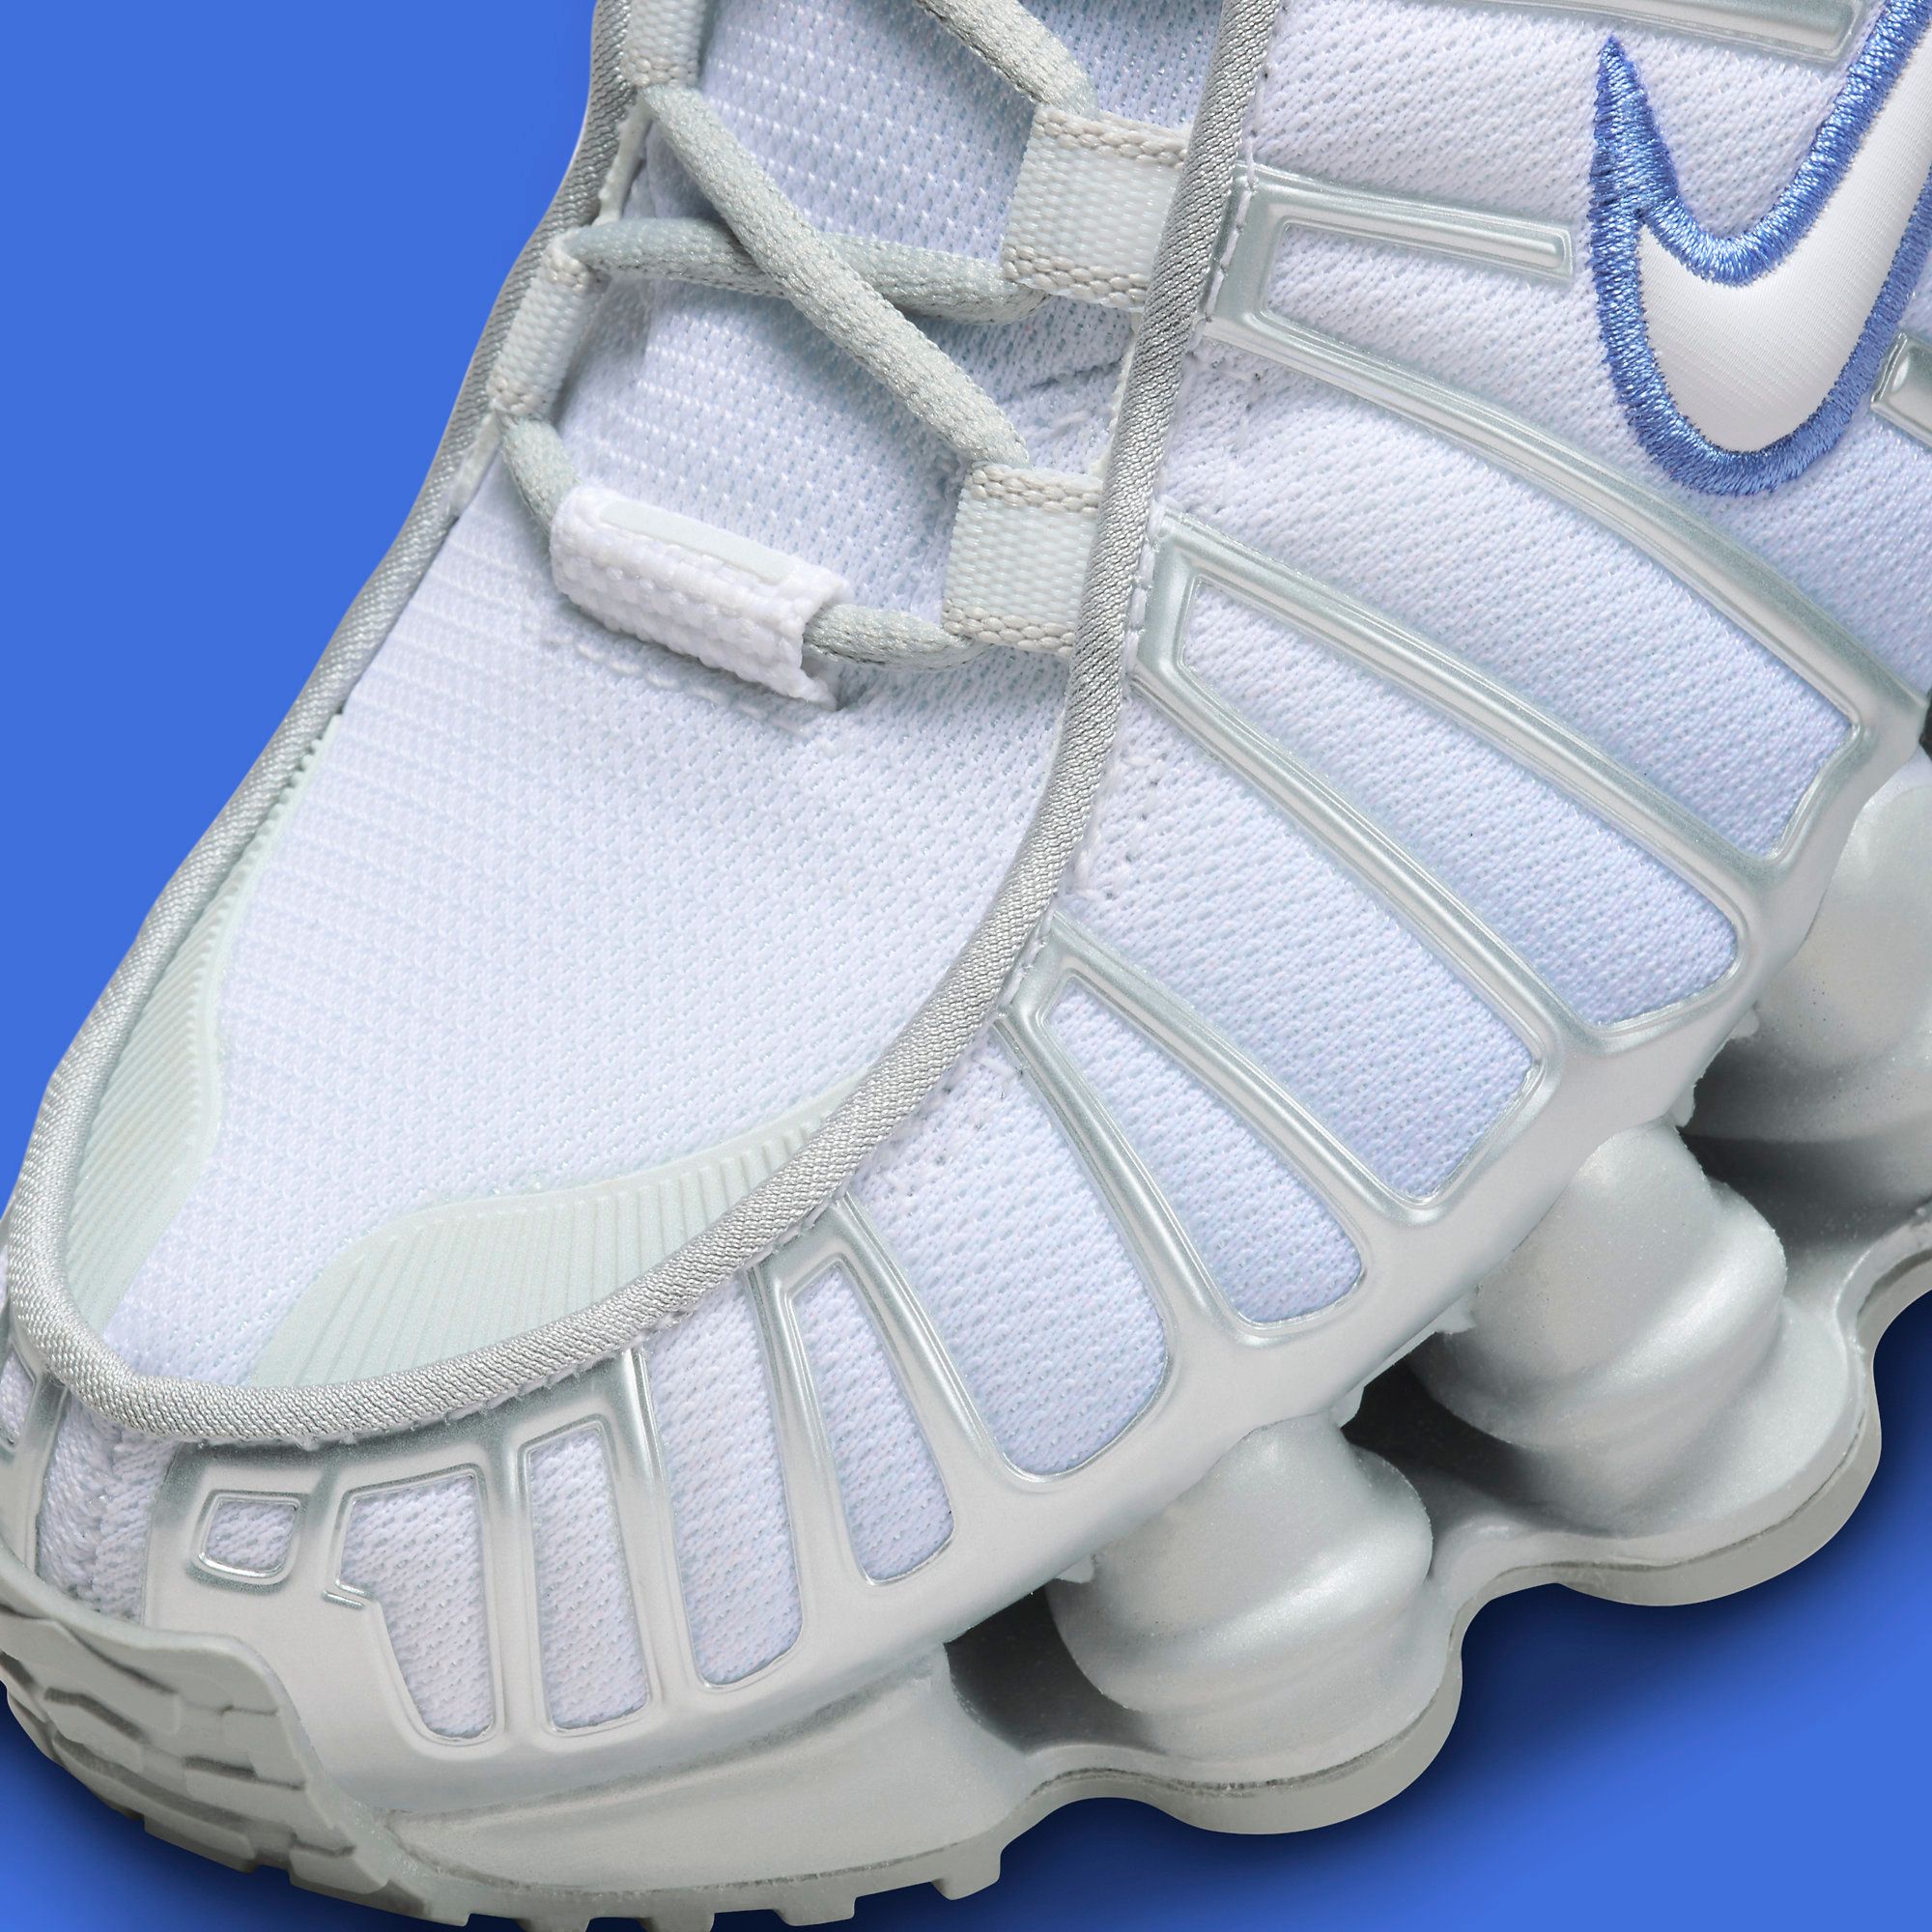 The lifestyle nike Shox TL Returns in a Simple Silver and Blue Set-Up |  OdegardcarpetsShops°